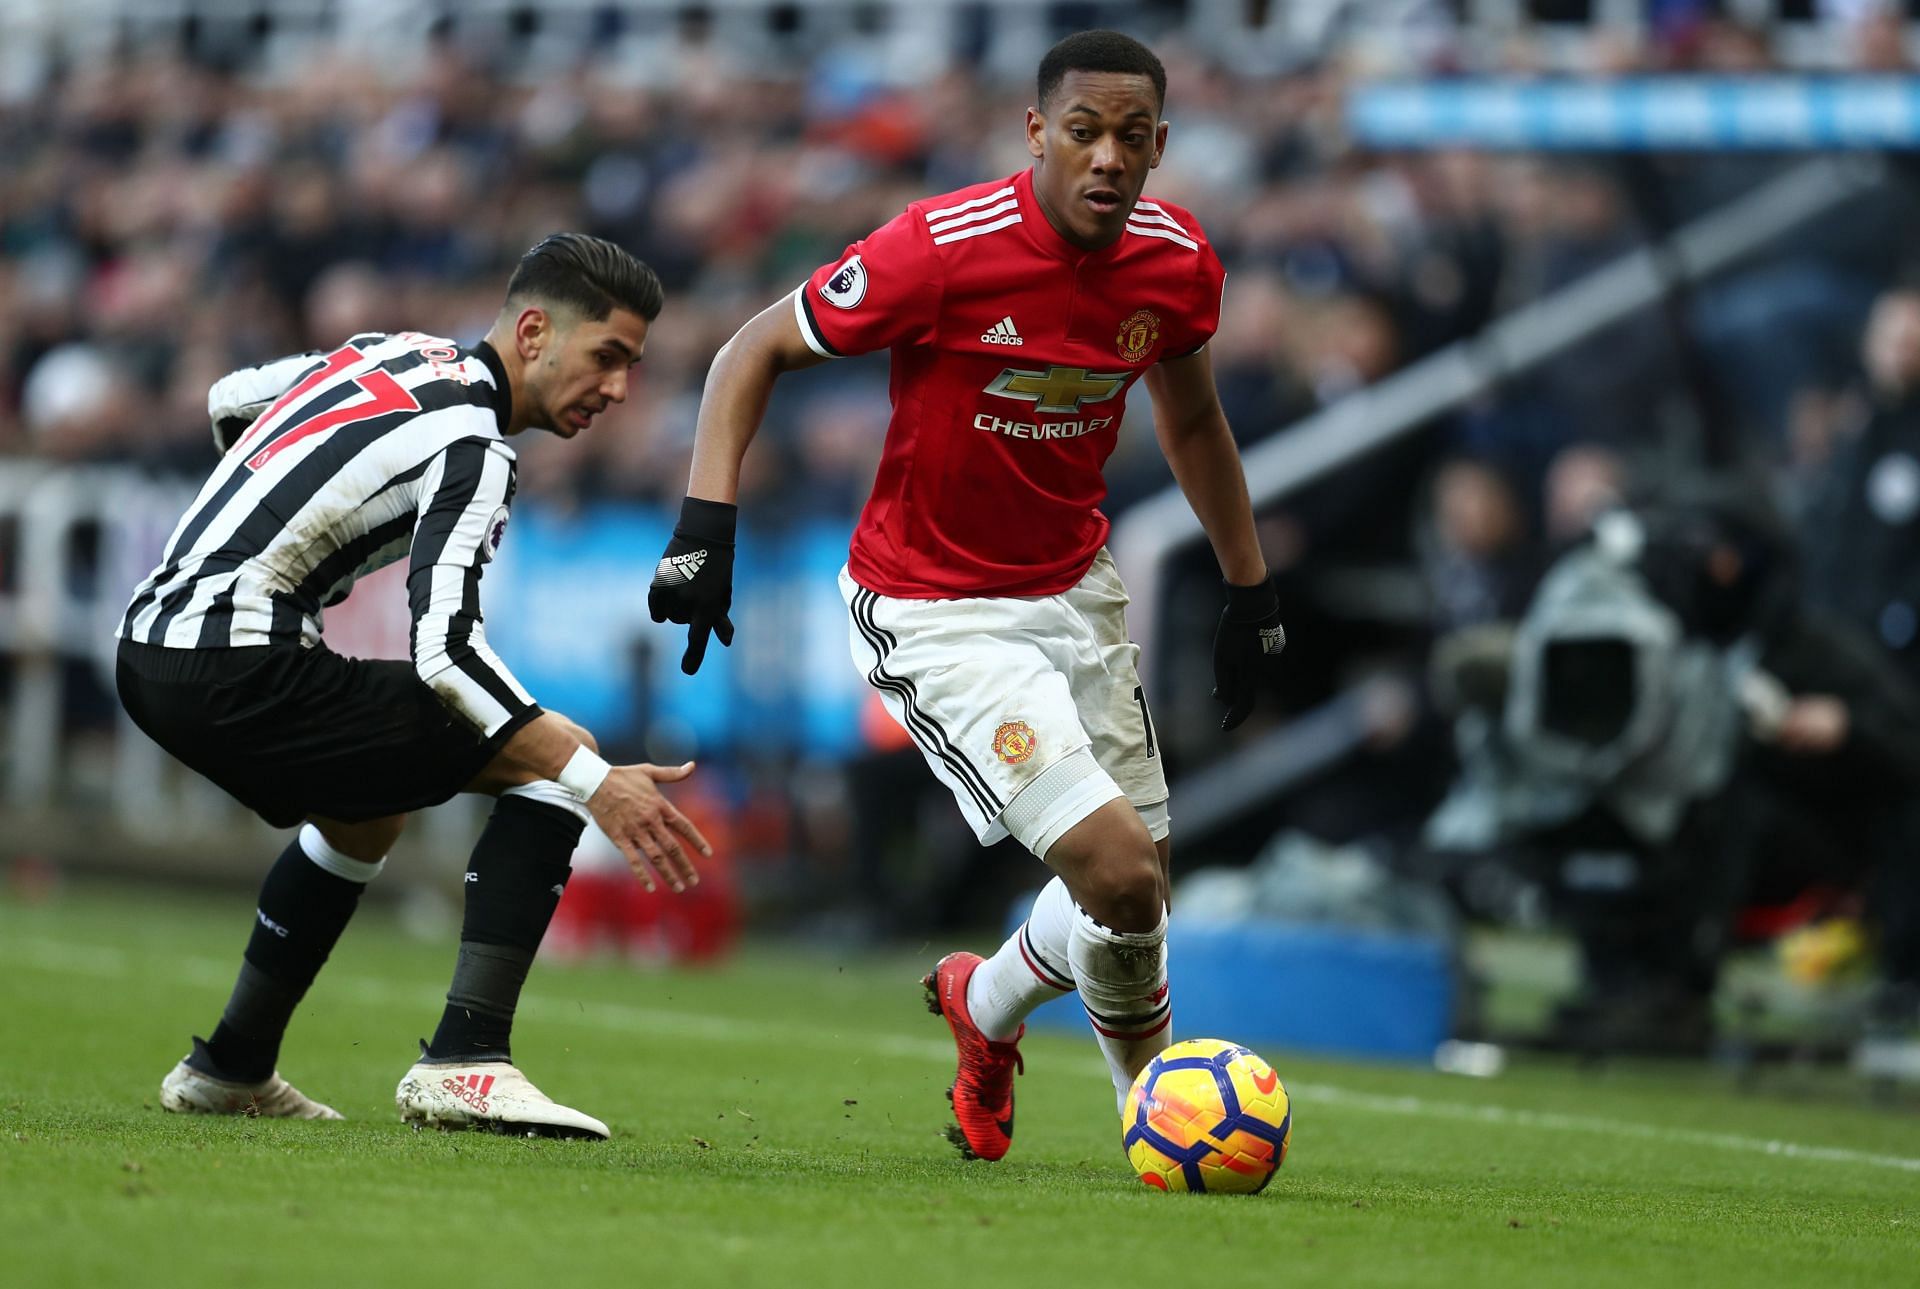 Anthony Martial can definitely get regular game-time at Newcastle United